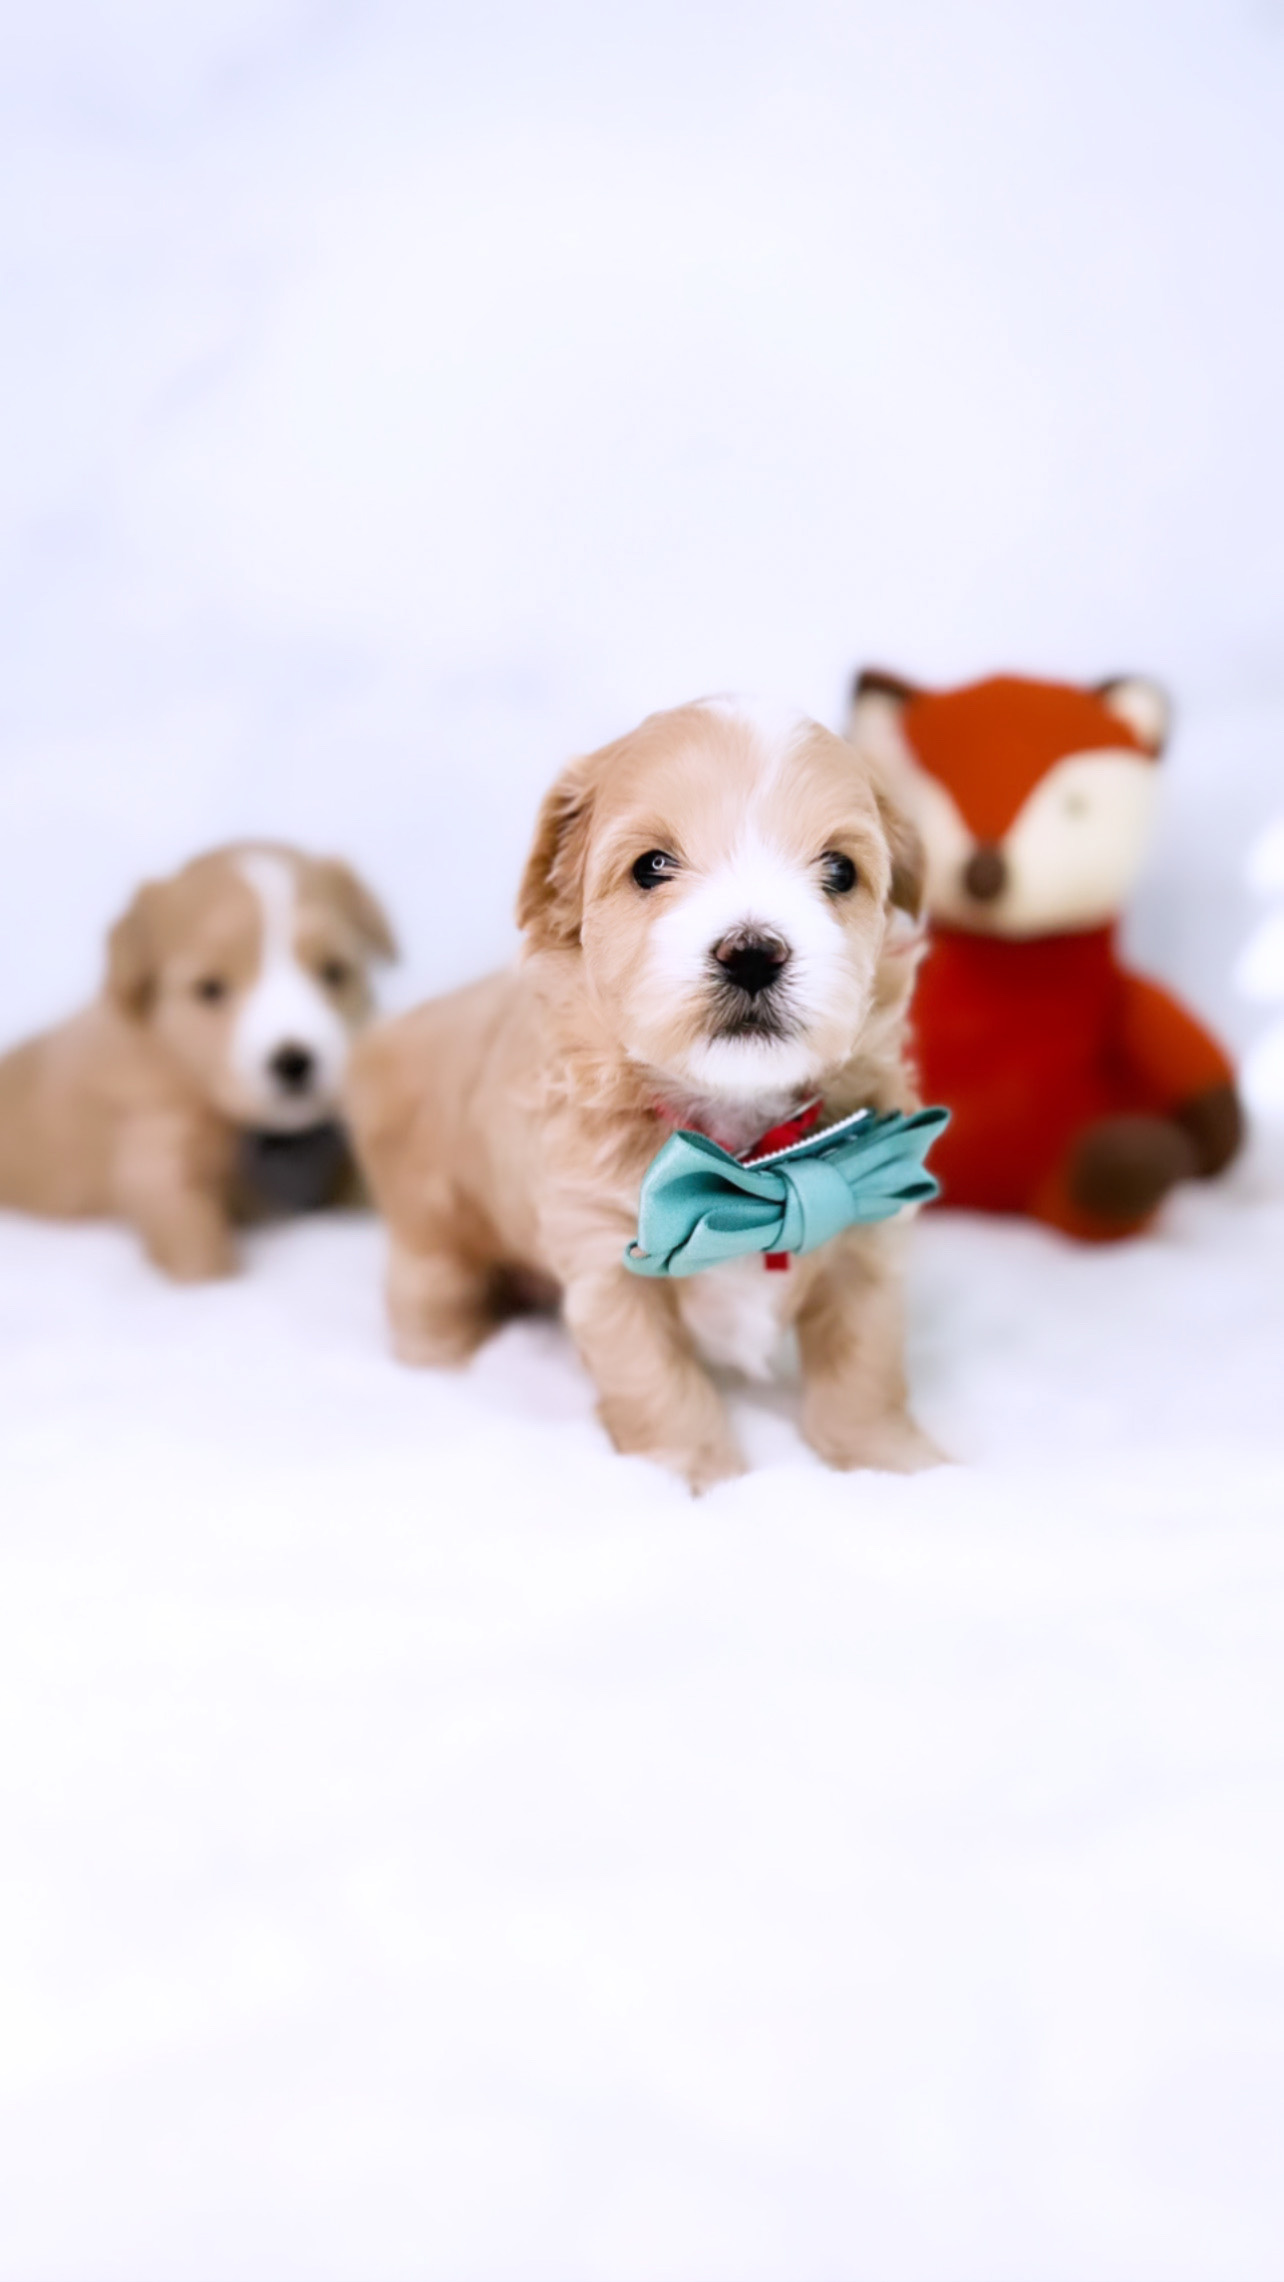 Two small dogs wearing adorable bow ties and surrounded by cuddly stuffed animals.